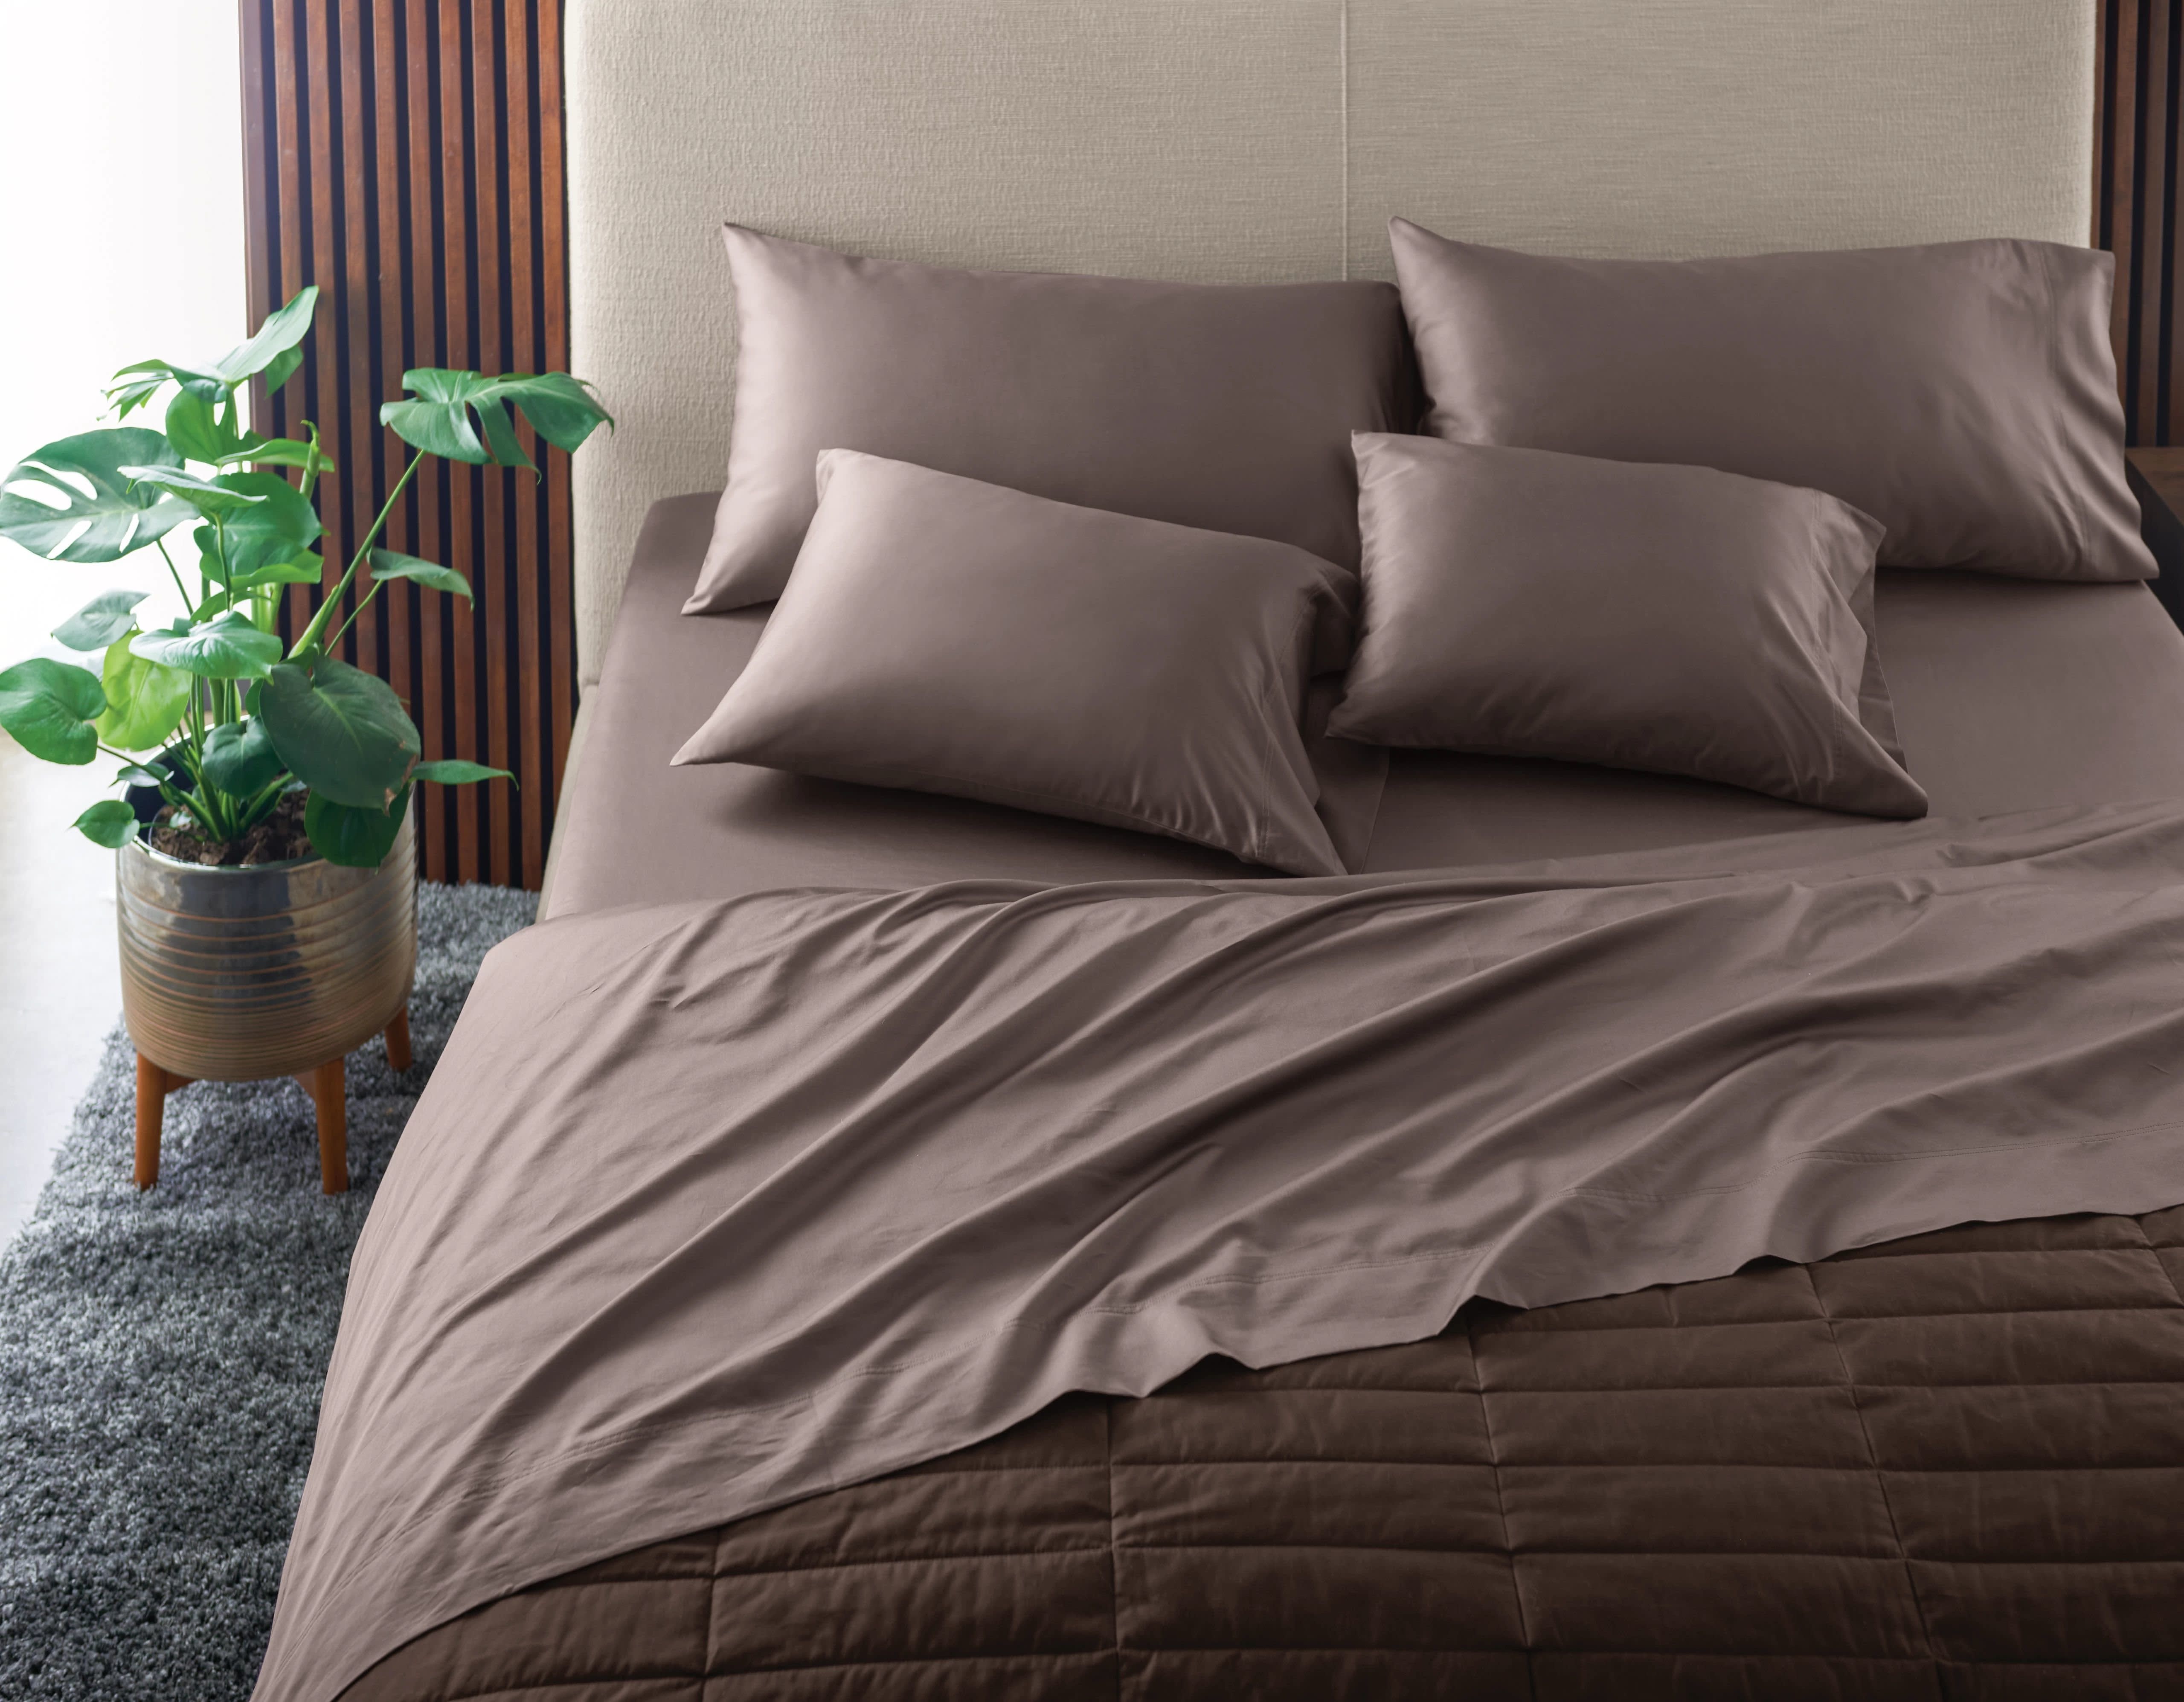 Comforter Falls Off When Using Satin Sheets?